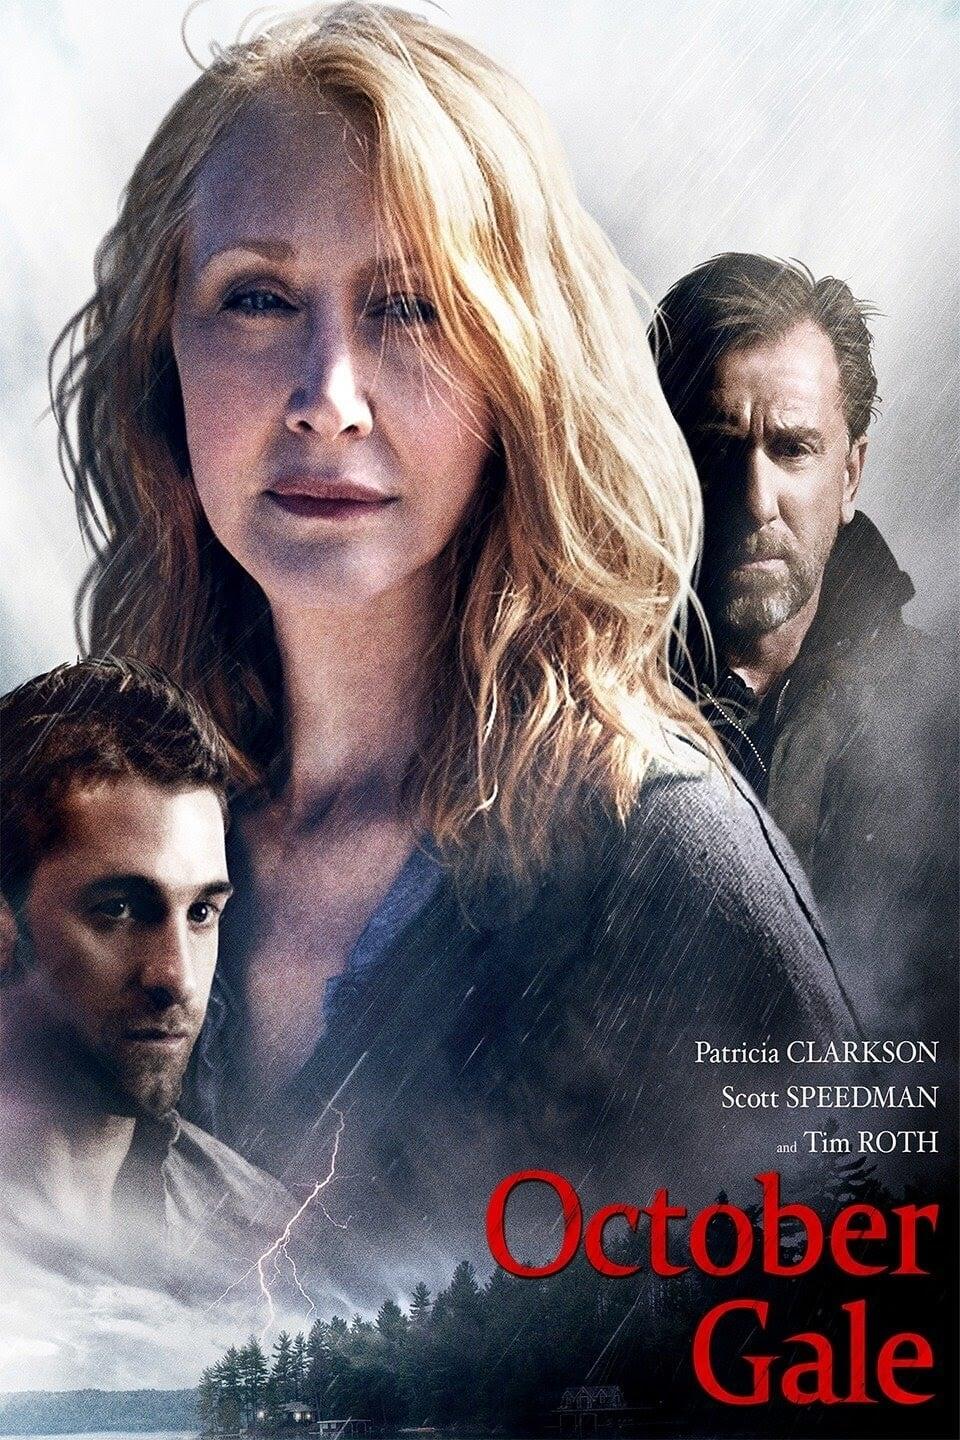 October Gale poster